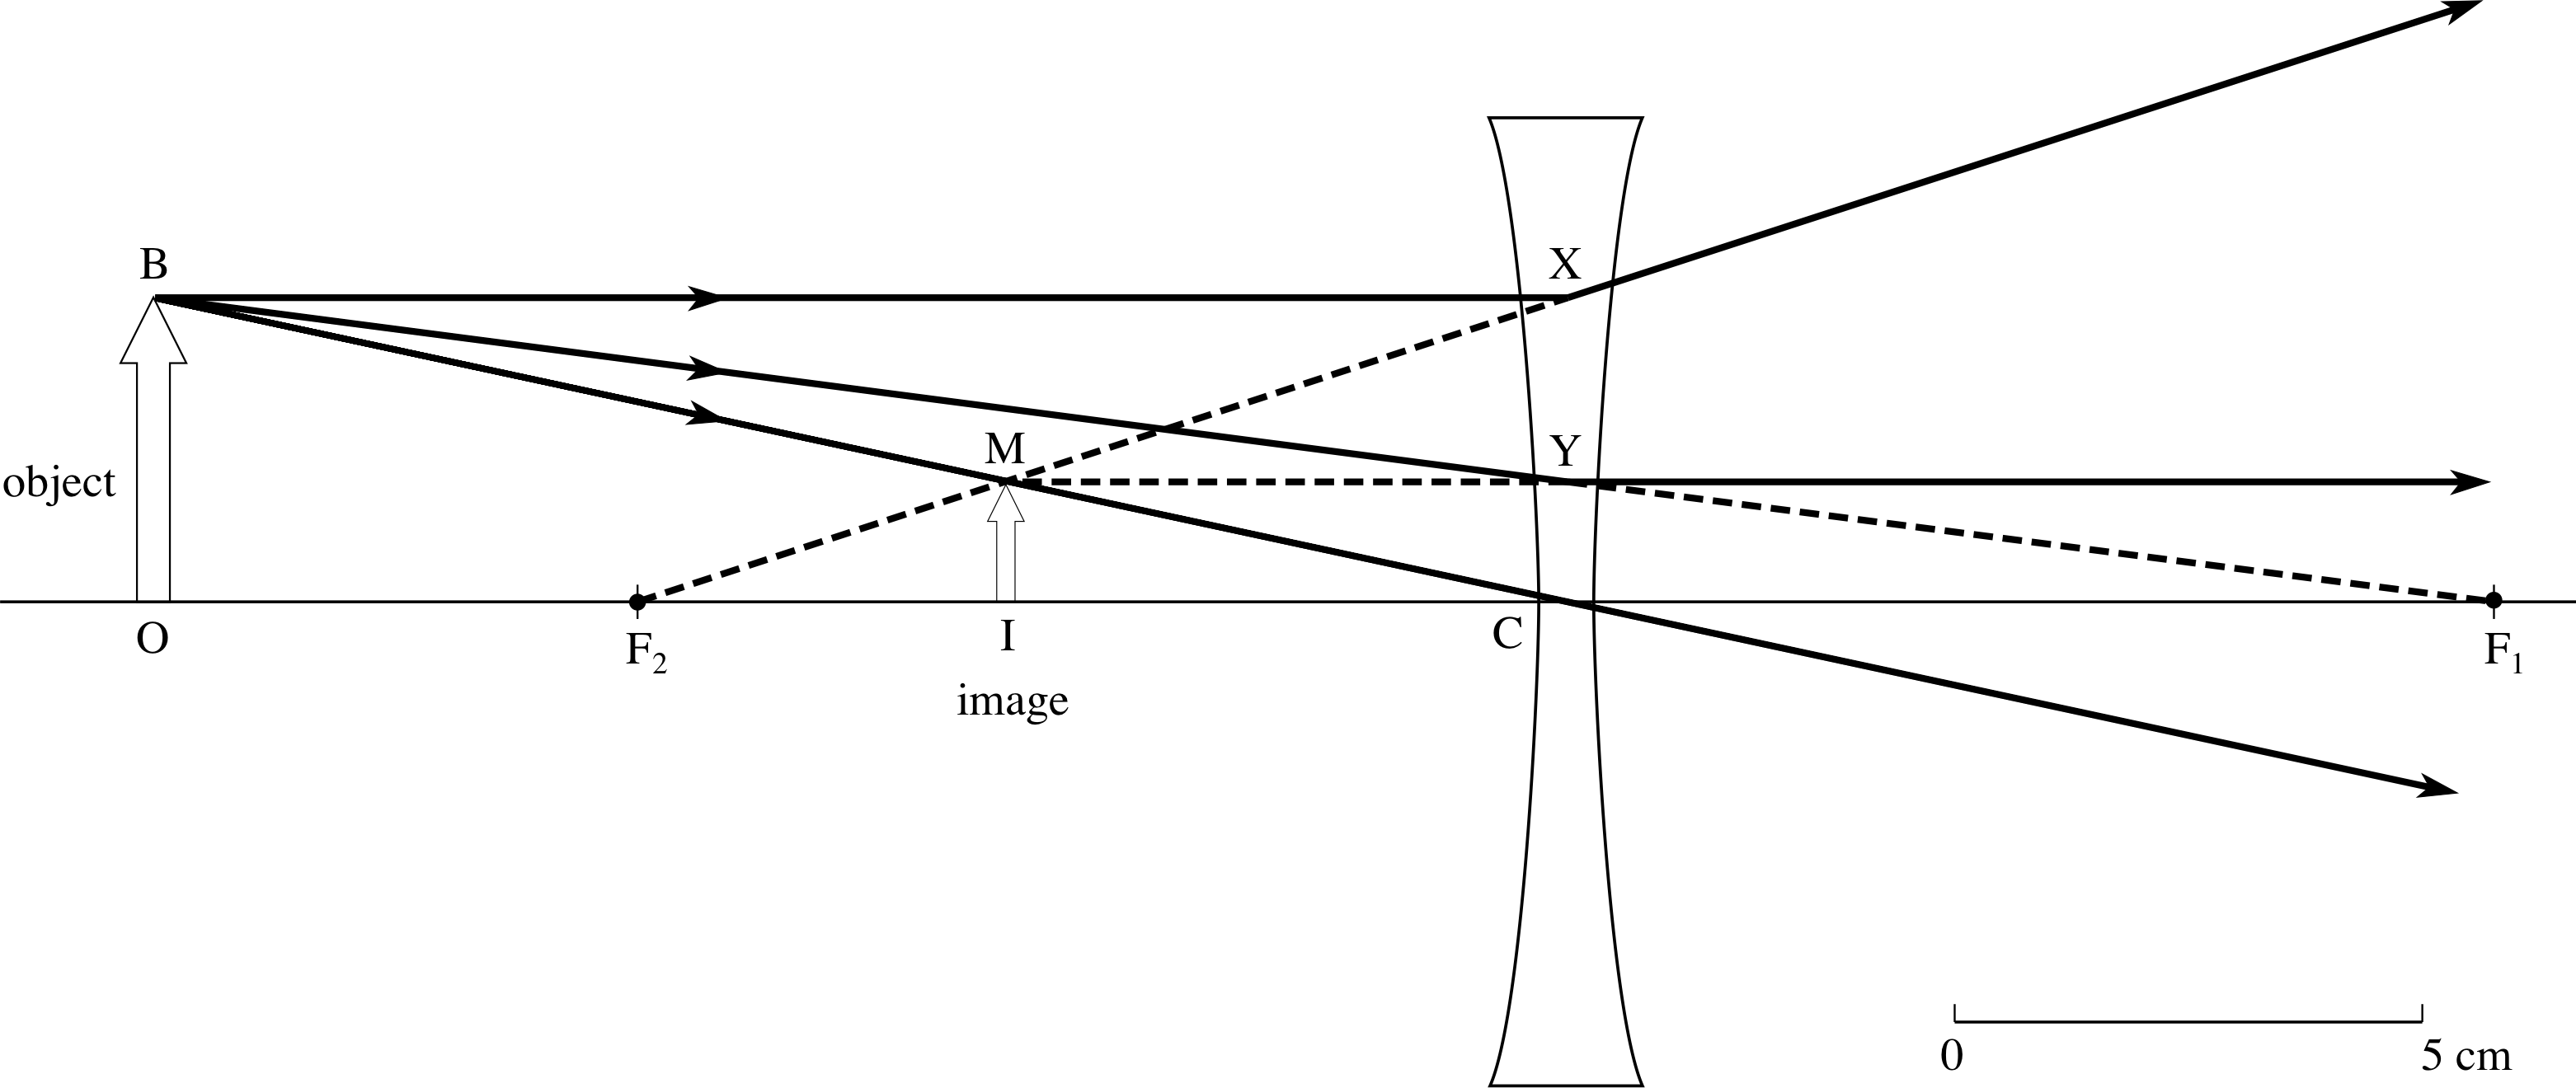 two converging lens ray diagram